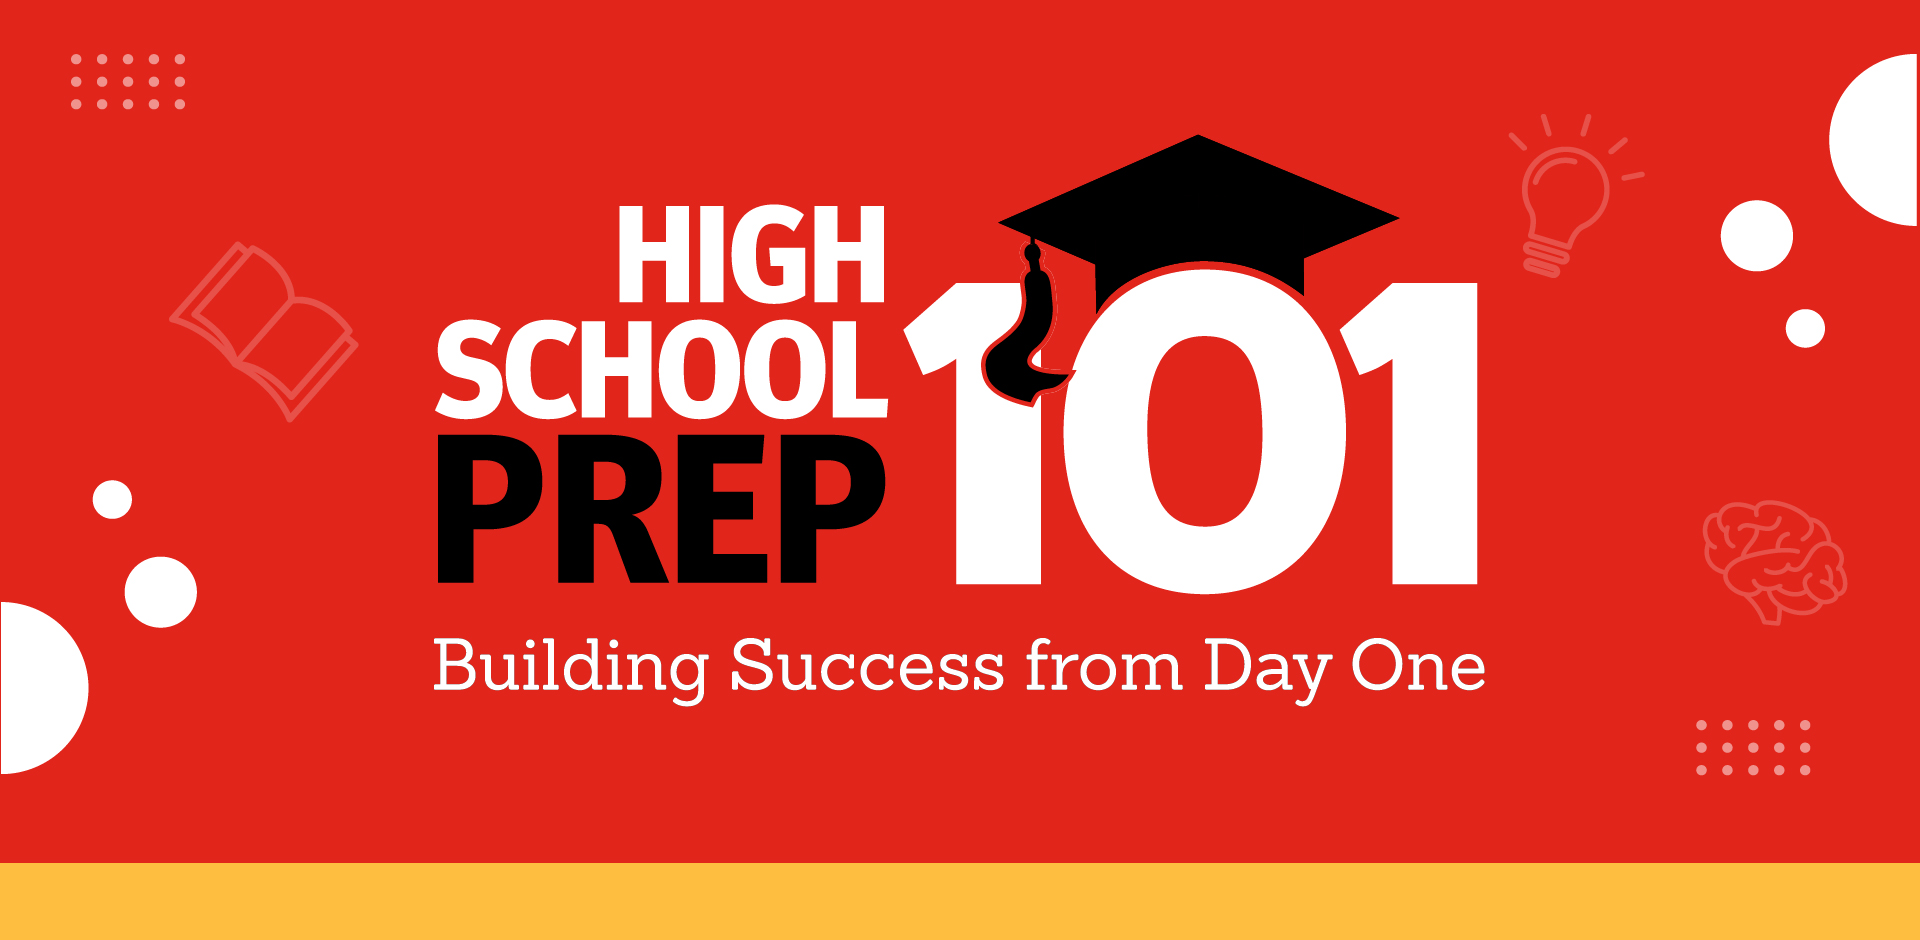 High School Transition: Building Success from Day One